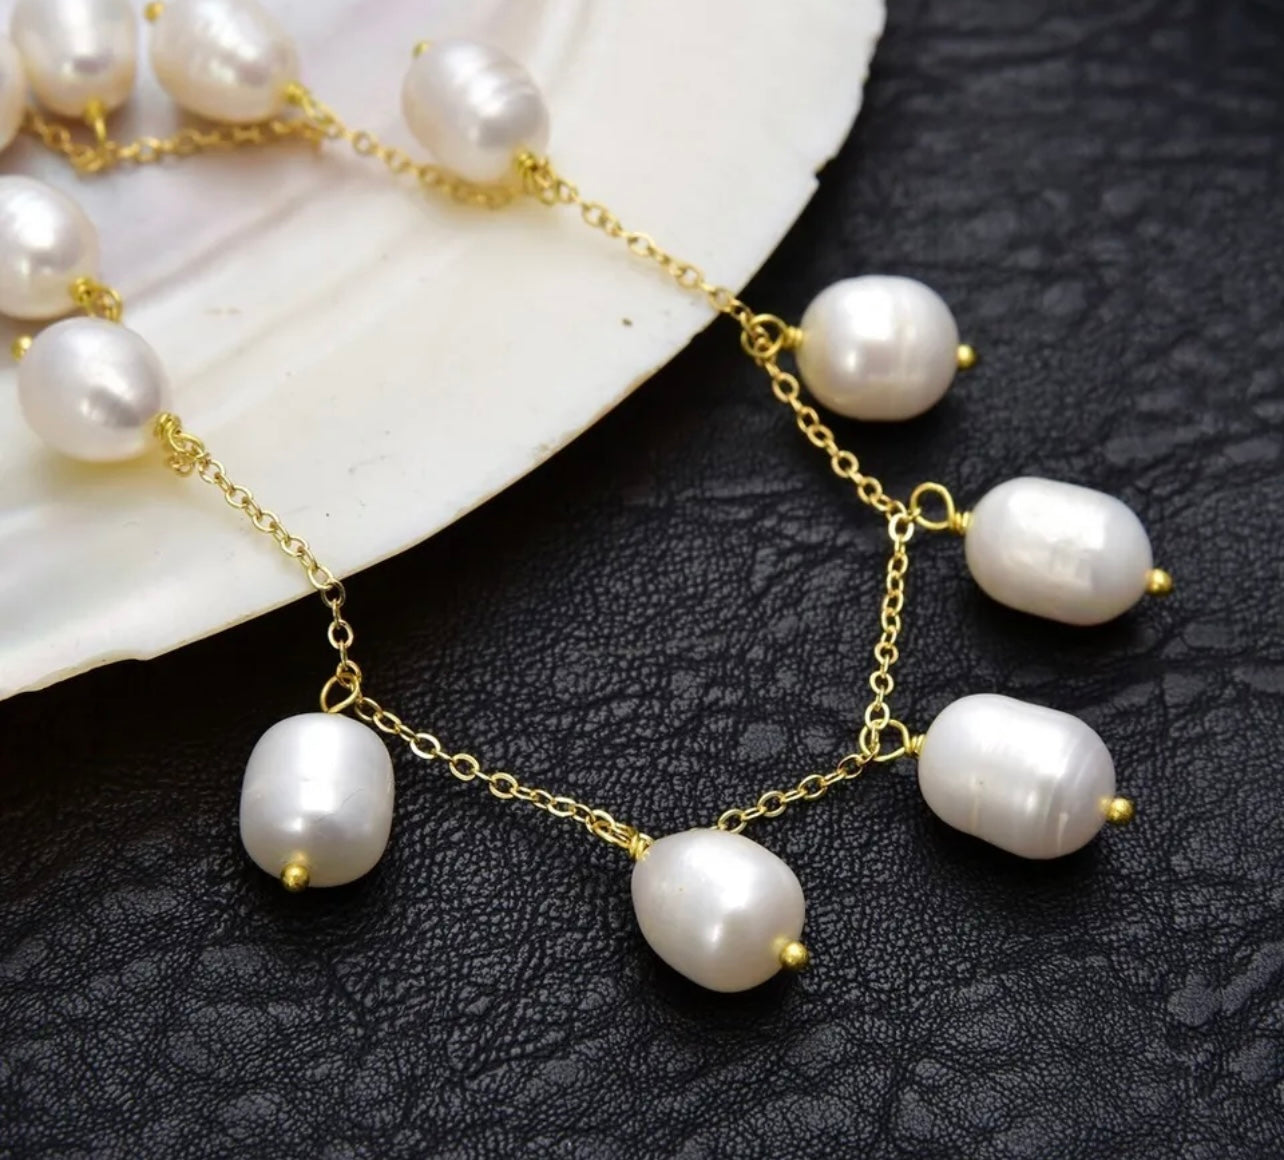 Lovely Freshwater Rice Pearls 18k Gold-Filled Chain Necklace 18”